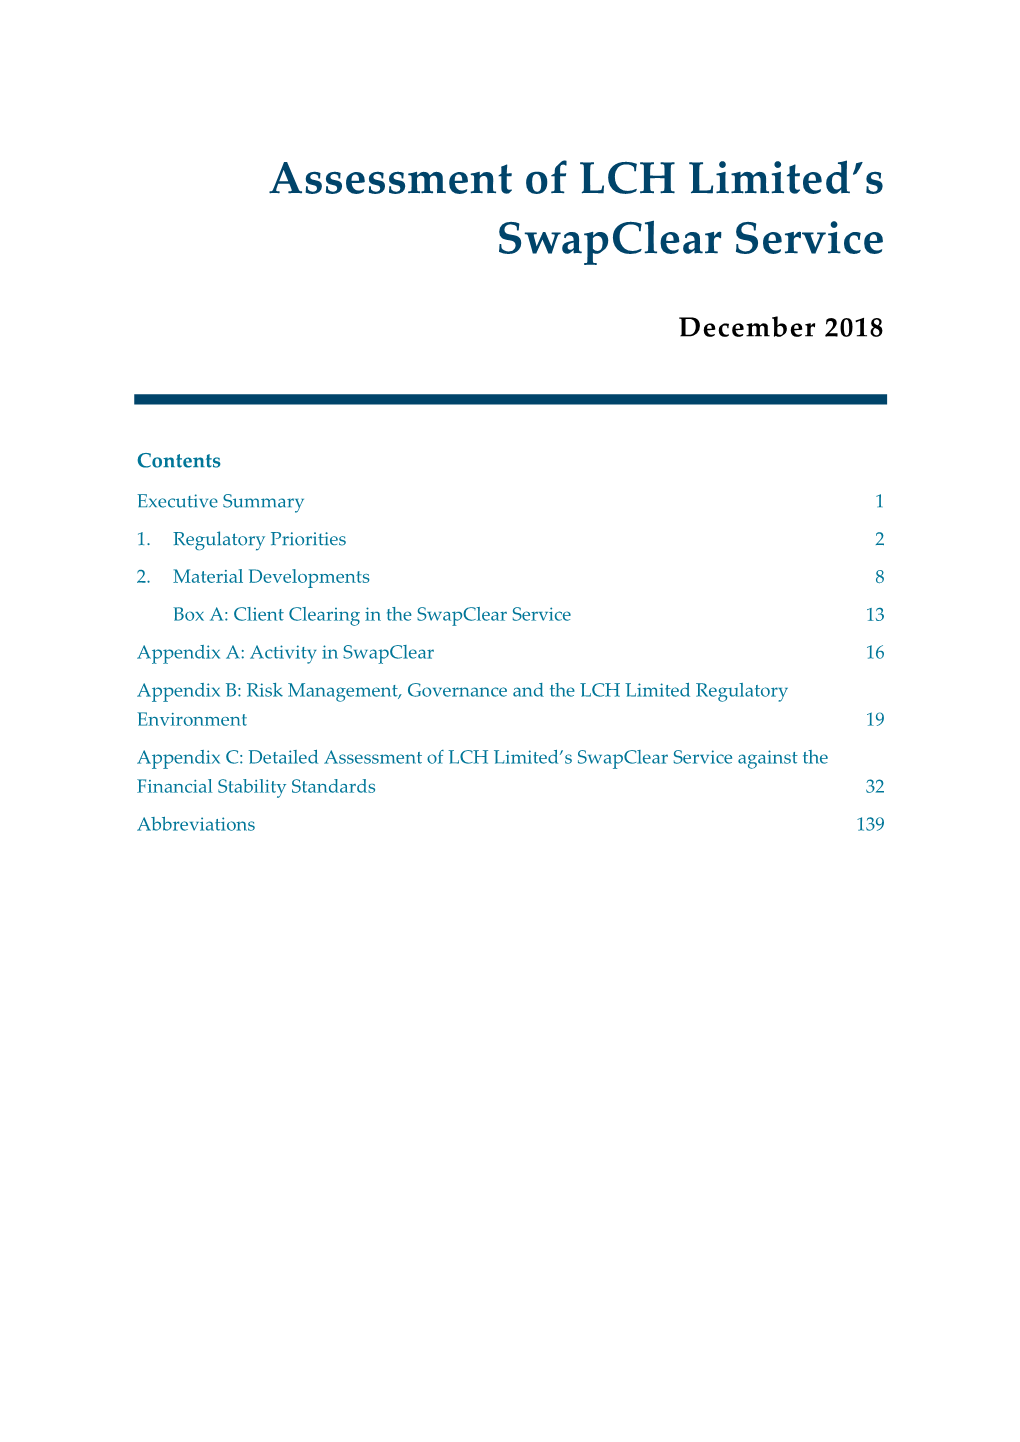 Assessment of LCH Limited's Swapclear Service